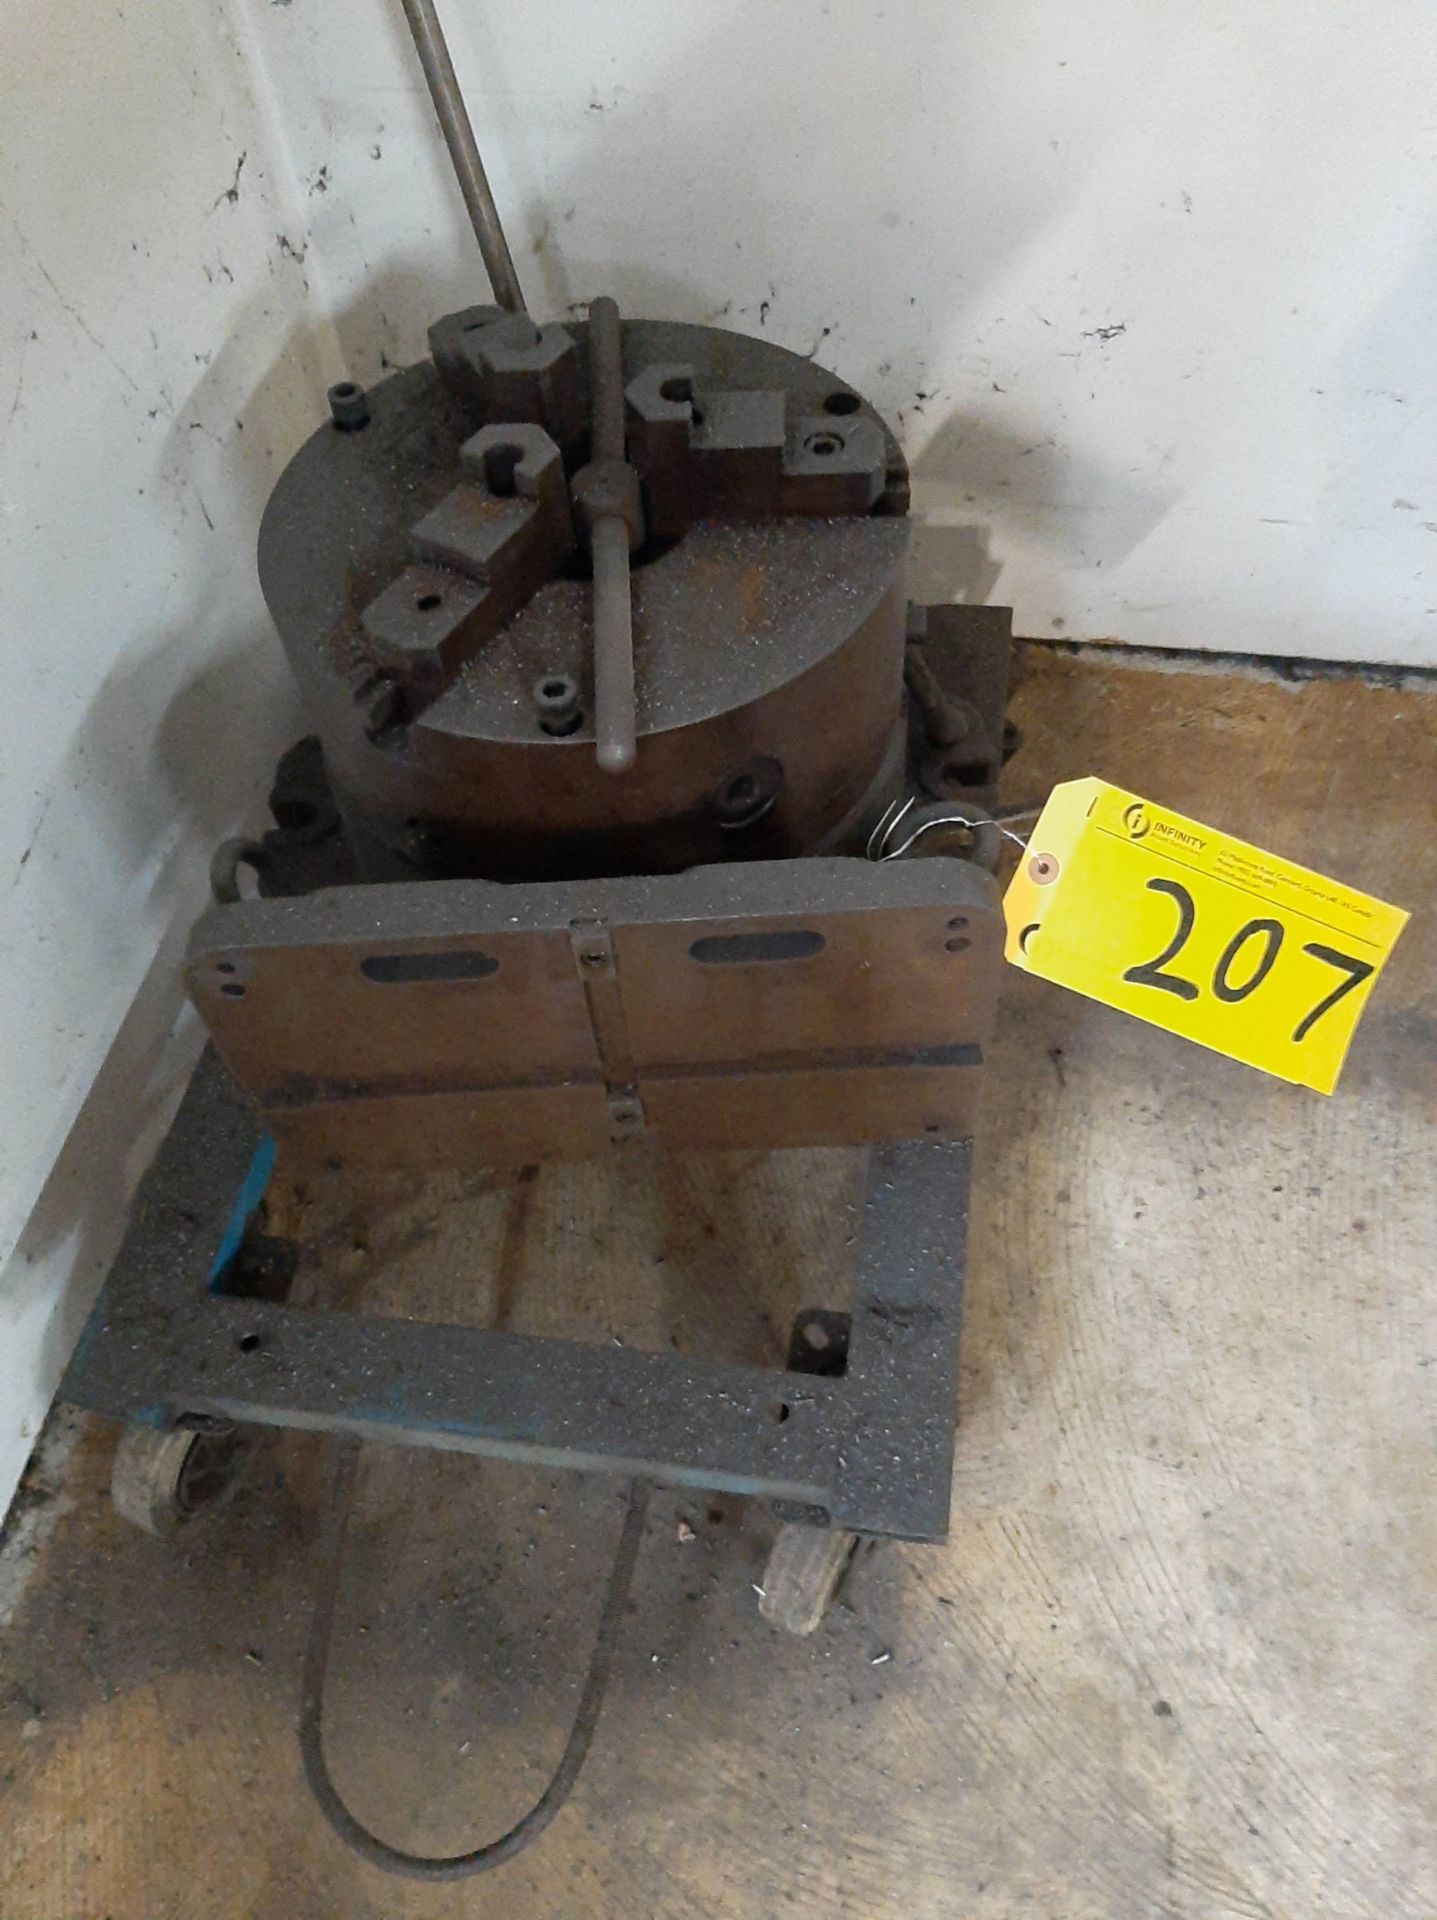 3-JAW CHUCK ON DOLLY